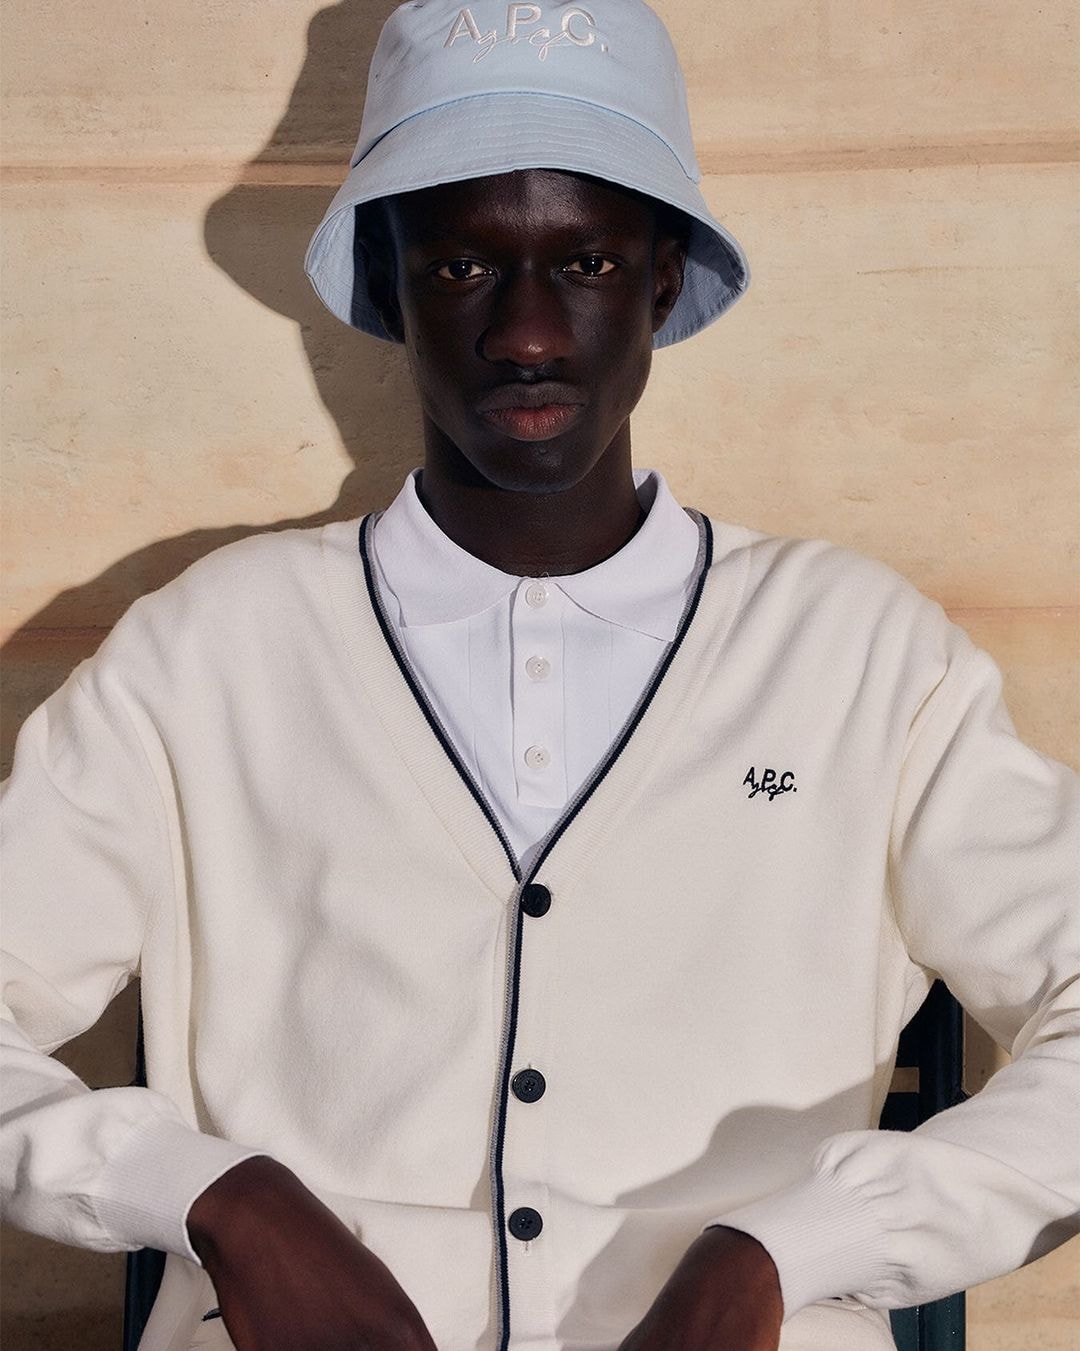 A.P.C. Golf Collection 2022: Hats, Bags, and Tops